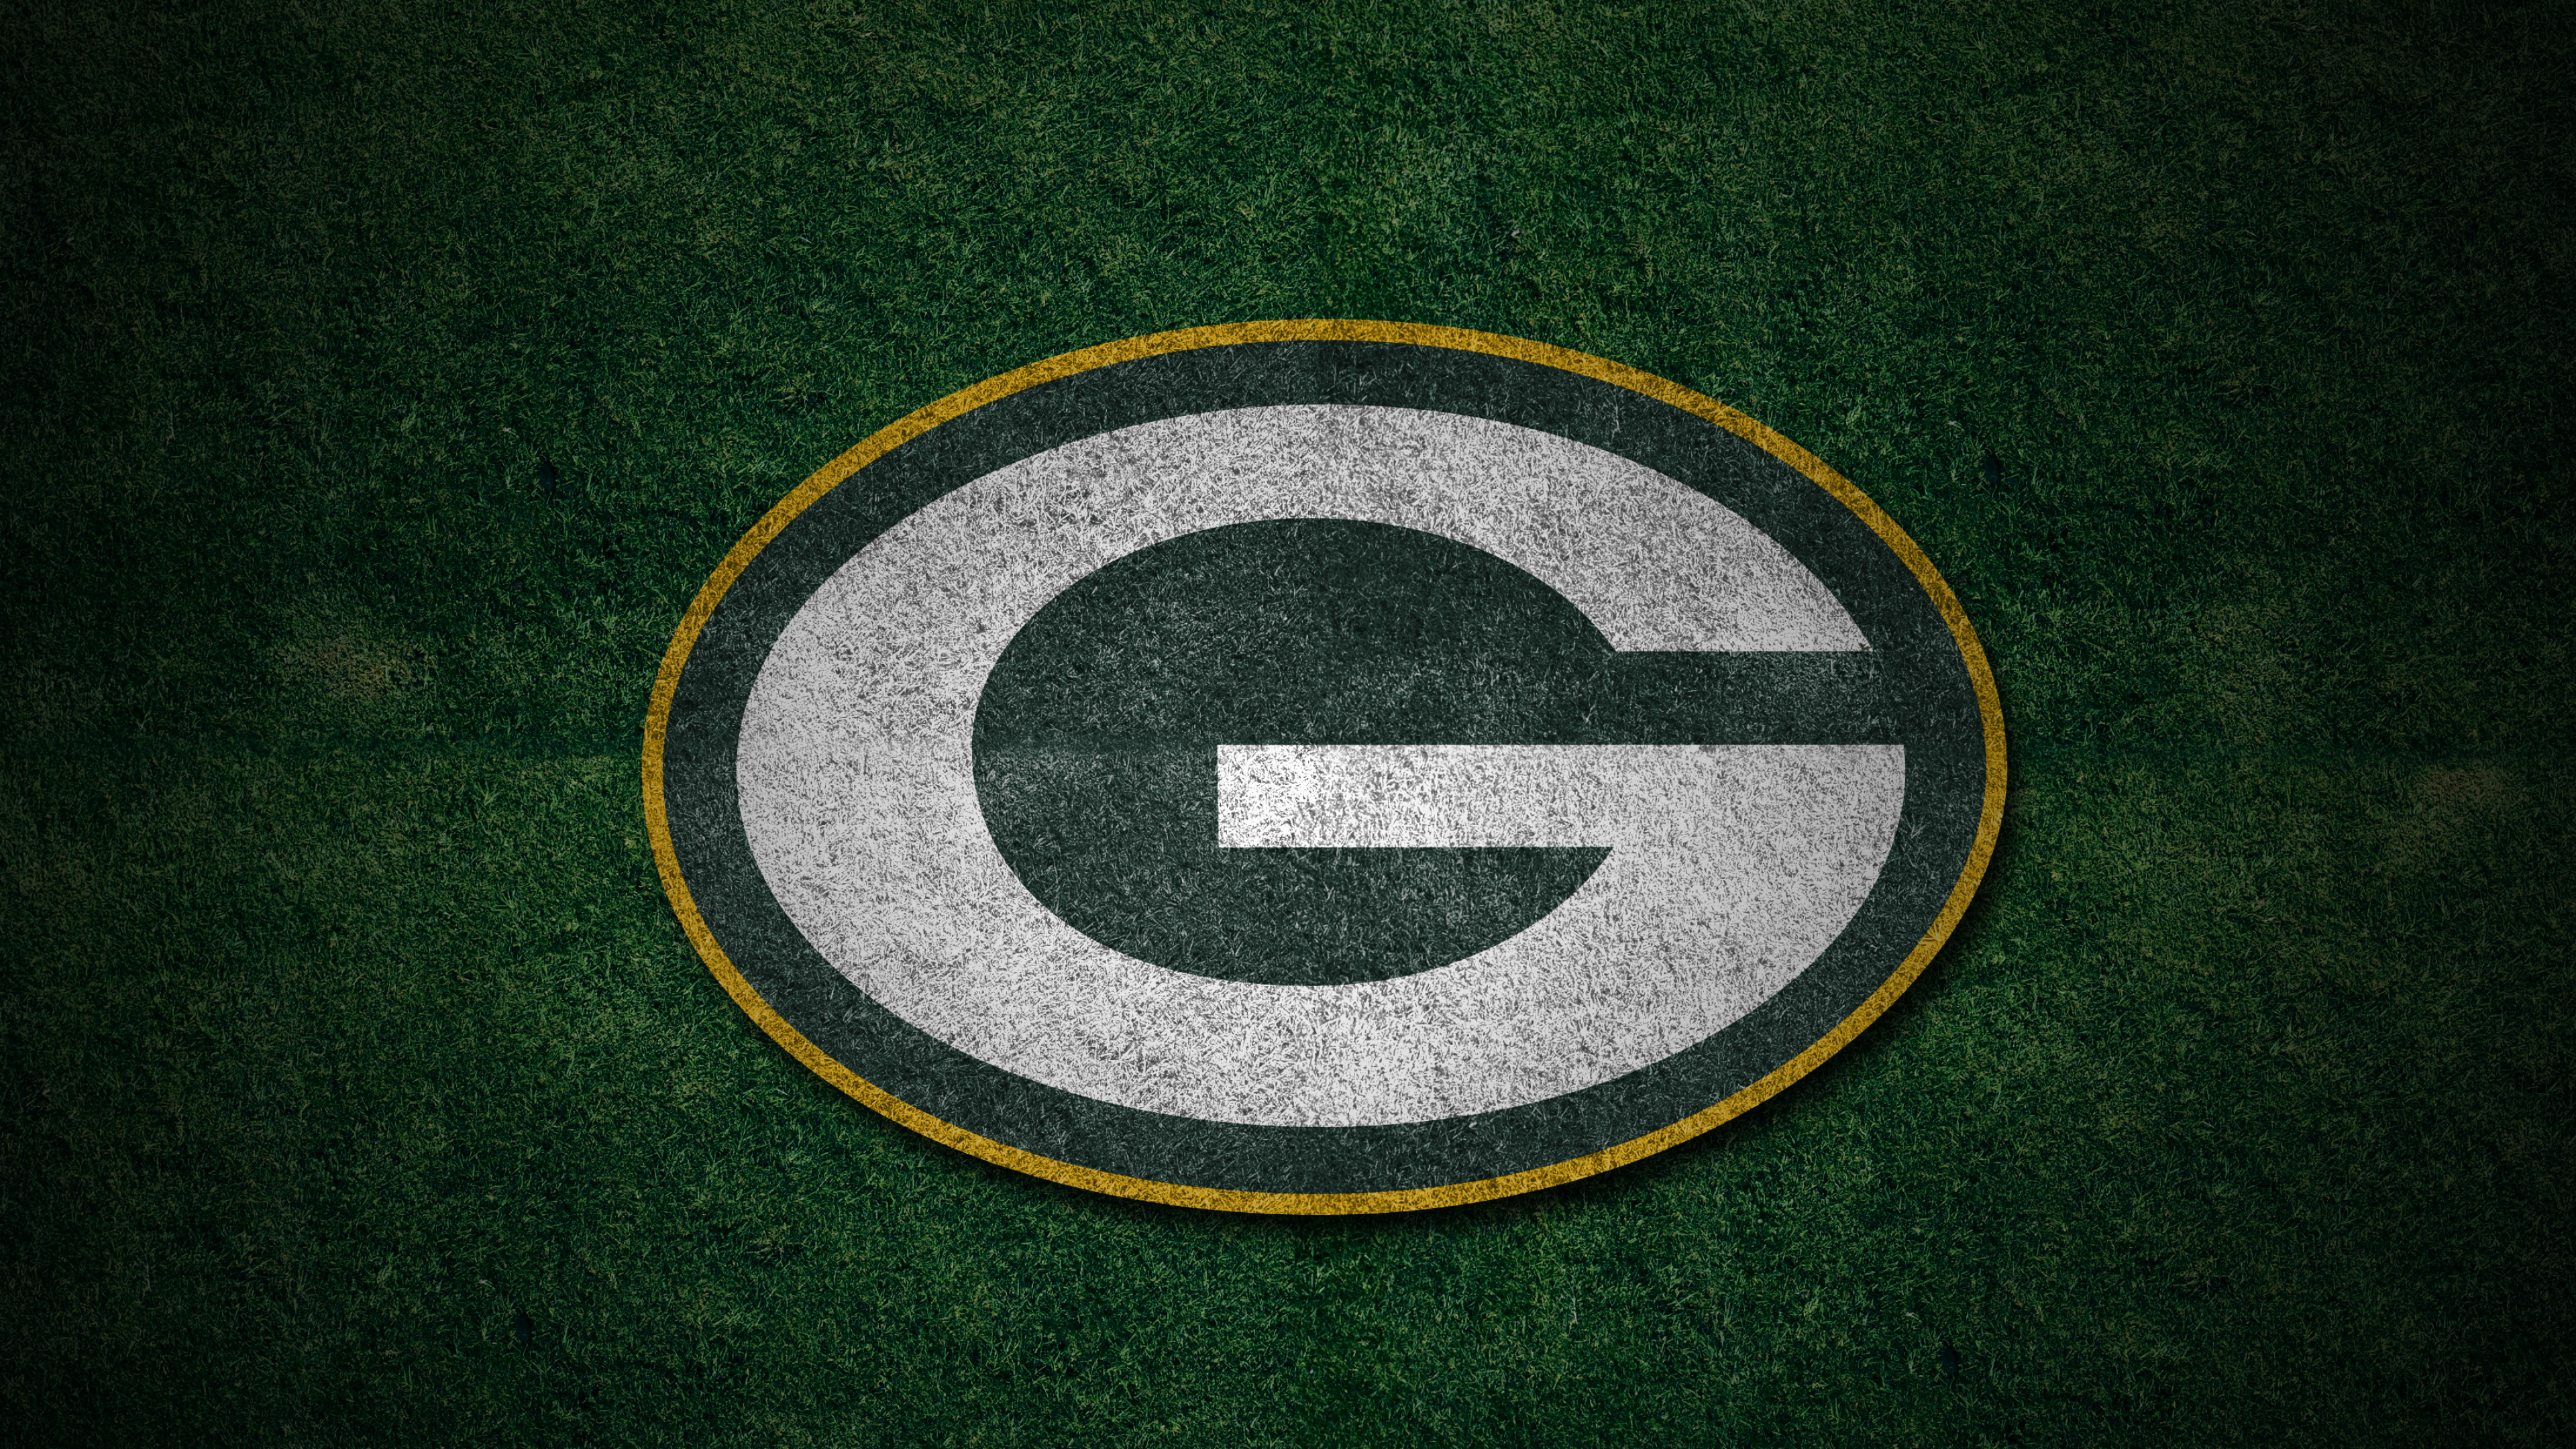 Green Bay Packers: The only non-profit, community-owned major league professional sports team based in the United States. 3840x2160 4K Wallpaper.